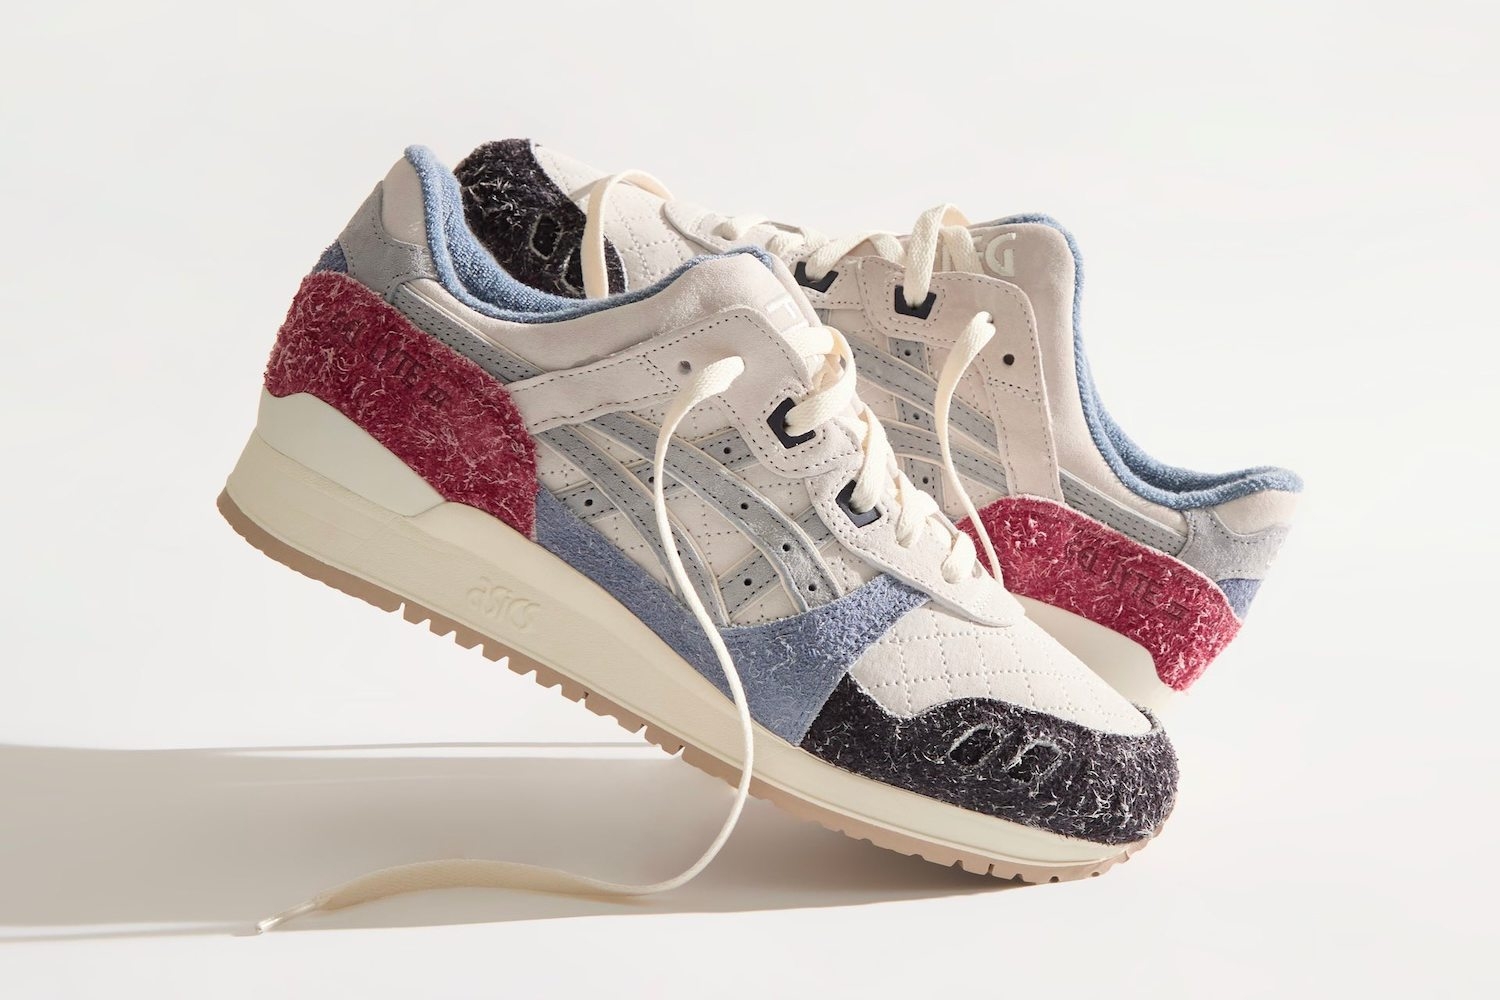 Official images of the Kith x ASICS Gel-Lyte III ‘Seoul’